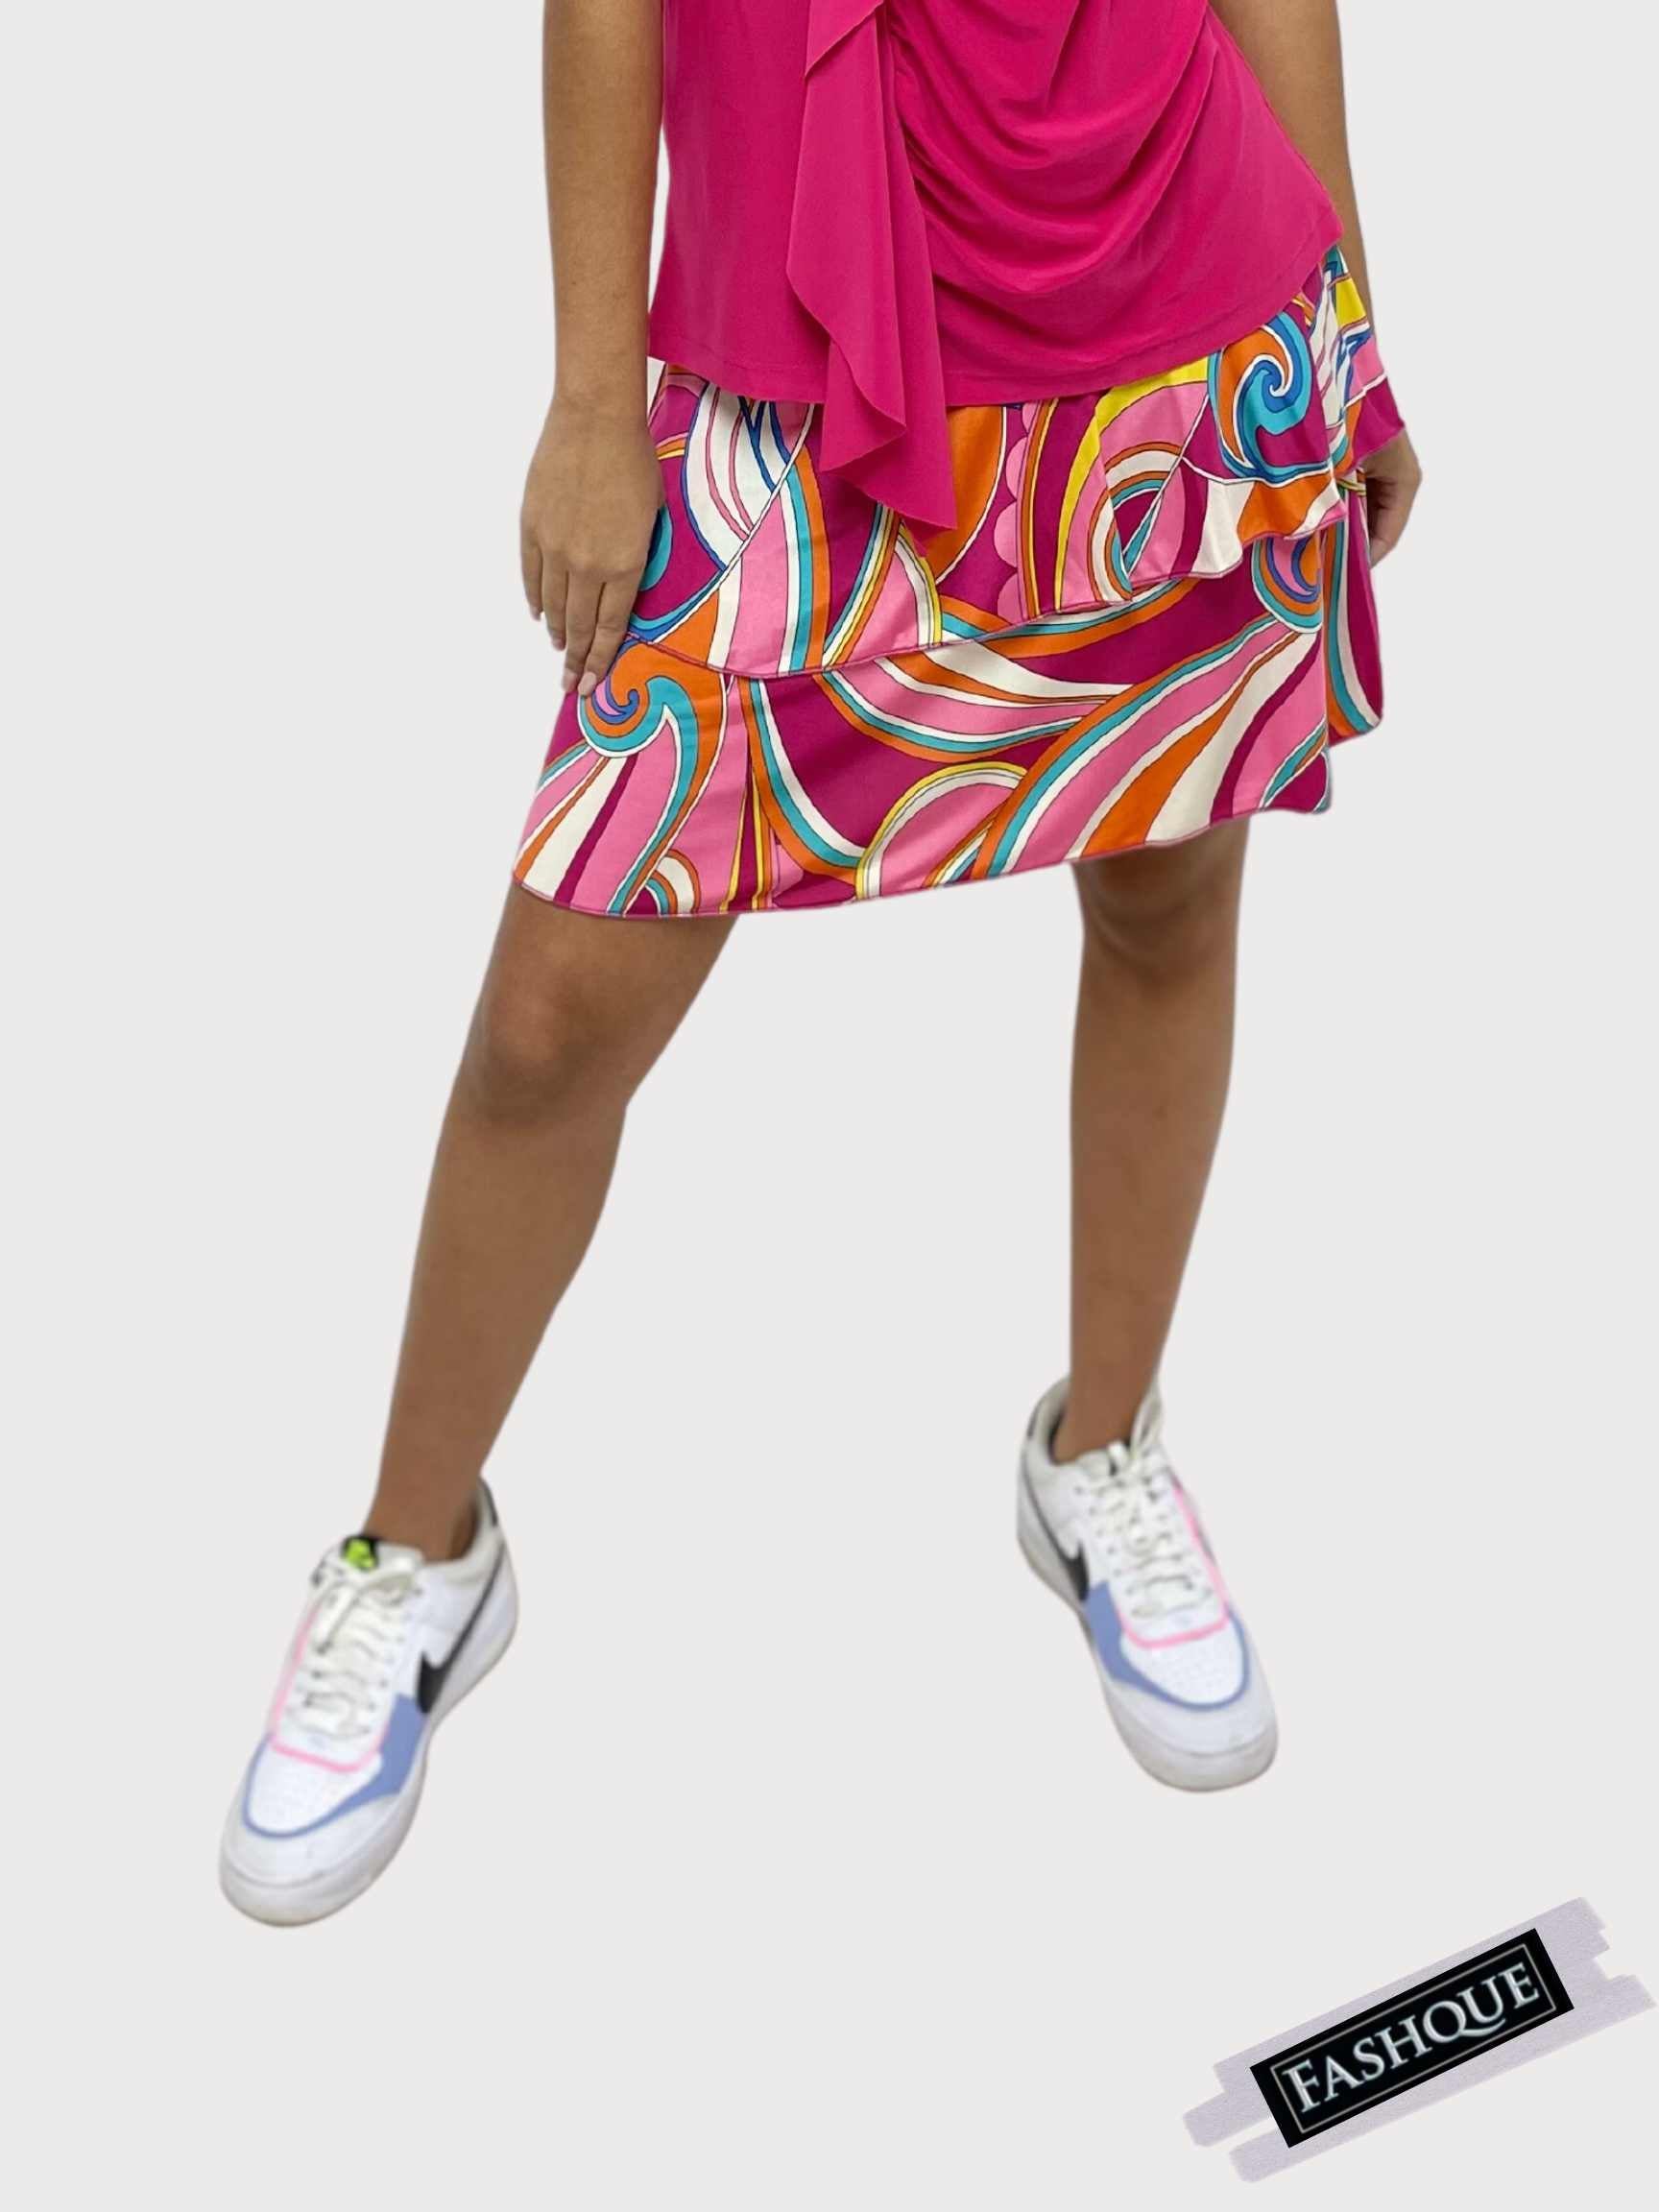 FASHQUE - 3 Tier PRINTED SKORT with the Ruffle in the center - SH001